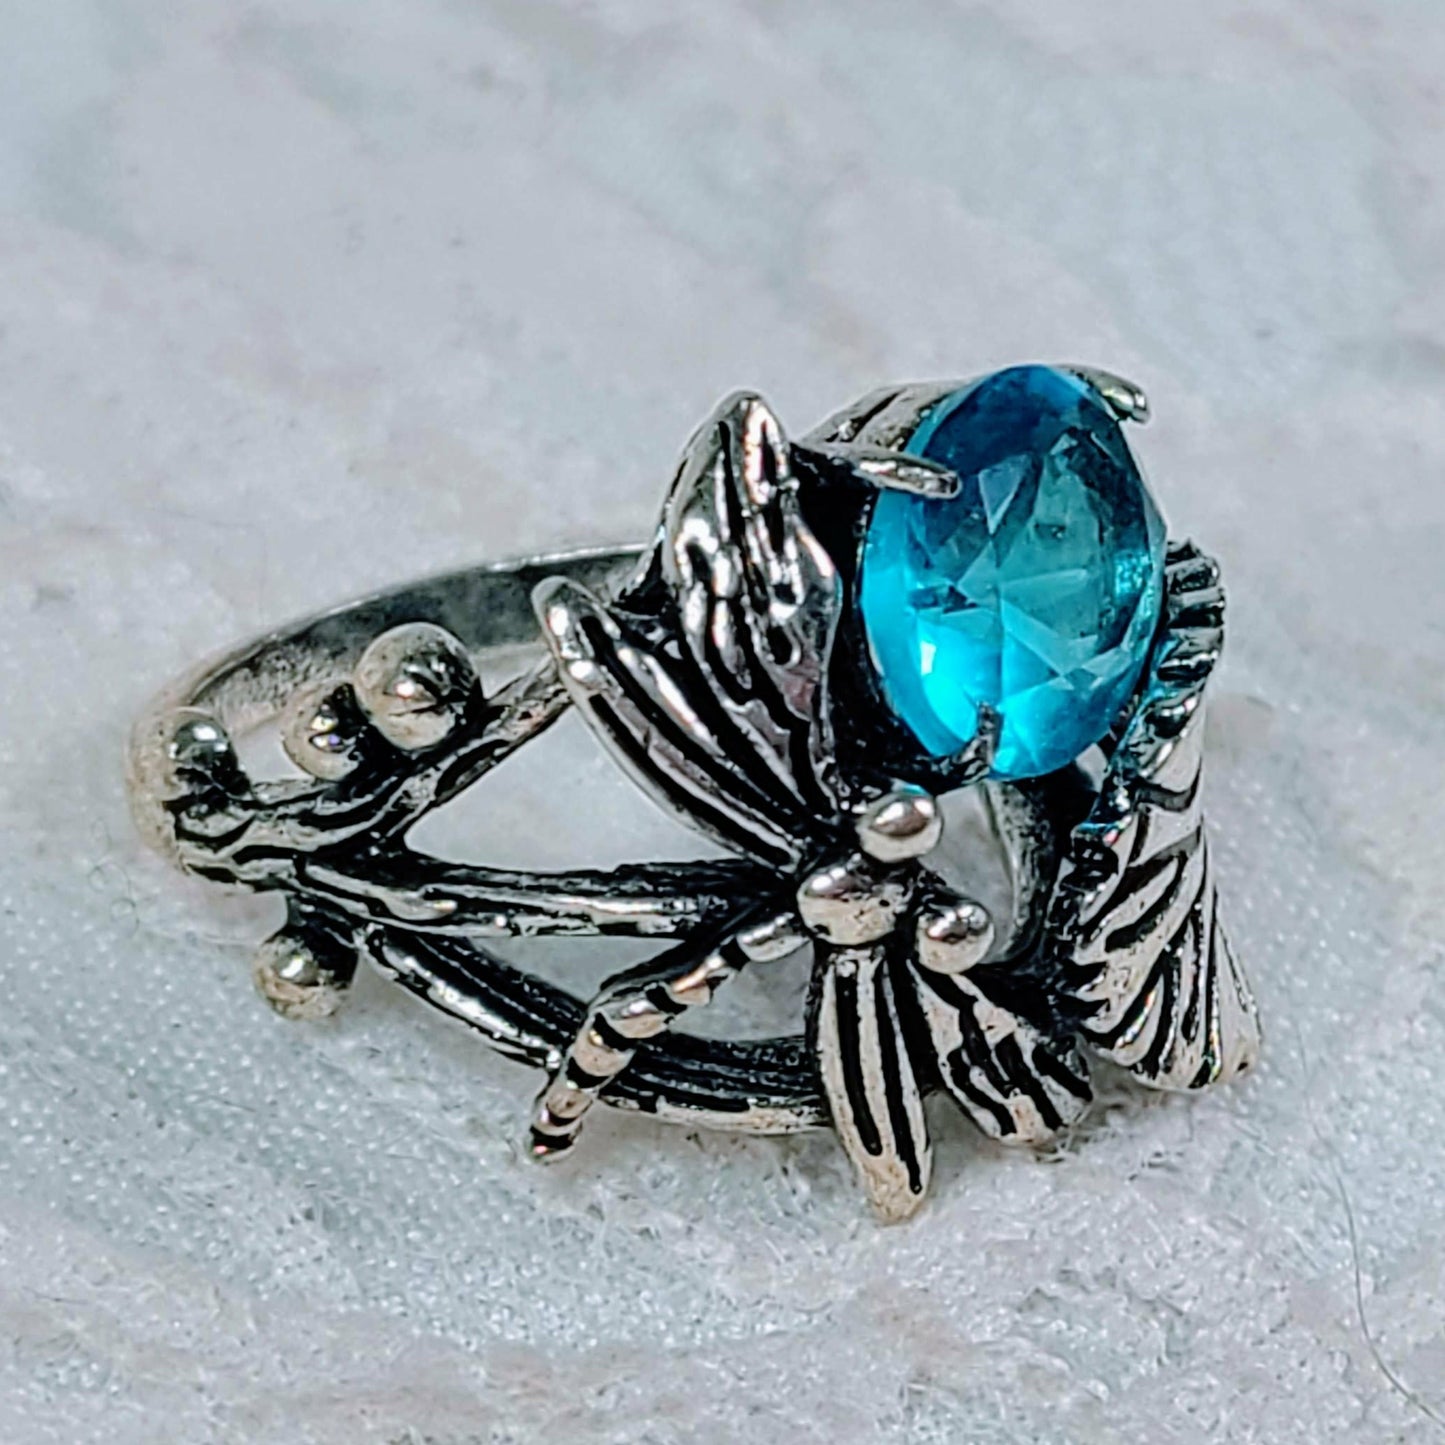 RING Silver Dragonfly Aquamarine Enchanted Fae Faerie Magick Ring RESTOCKED Witchcraft Sidhe Creativity Dreams